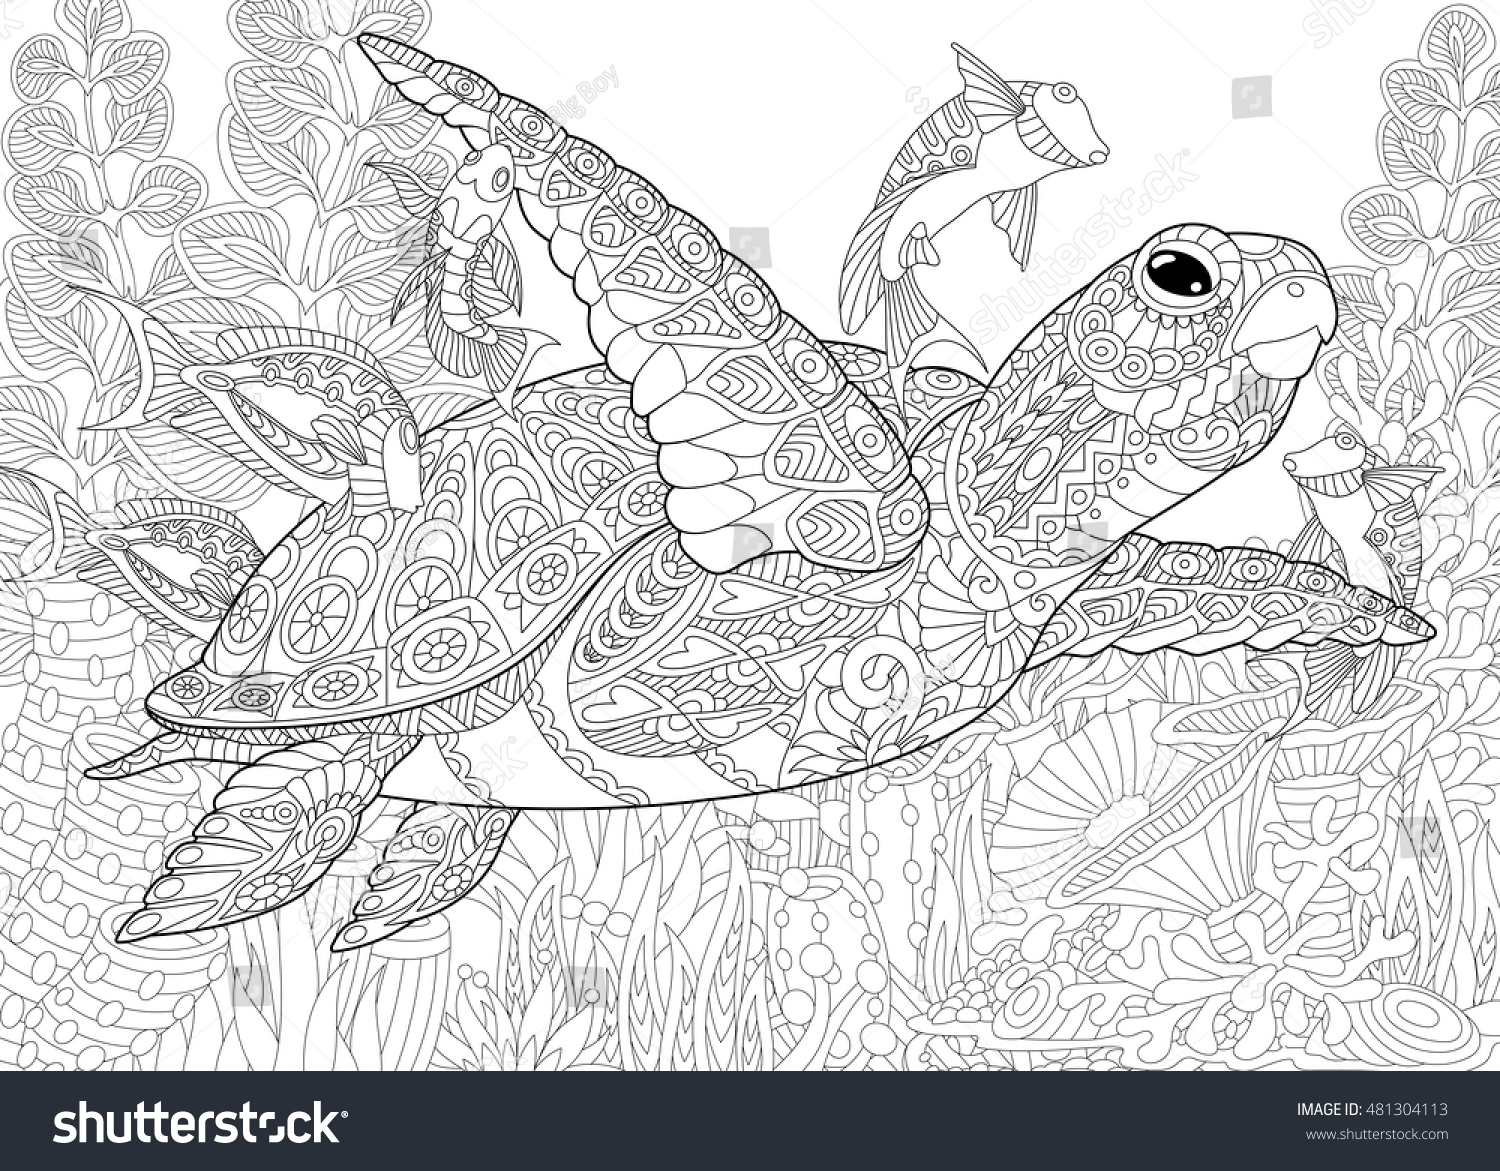 Stylized position turtle tortoise tropical fish stock vector royalty free